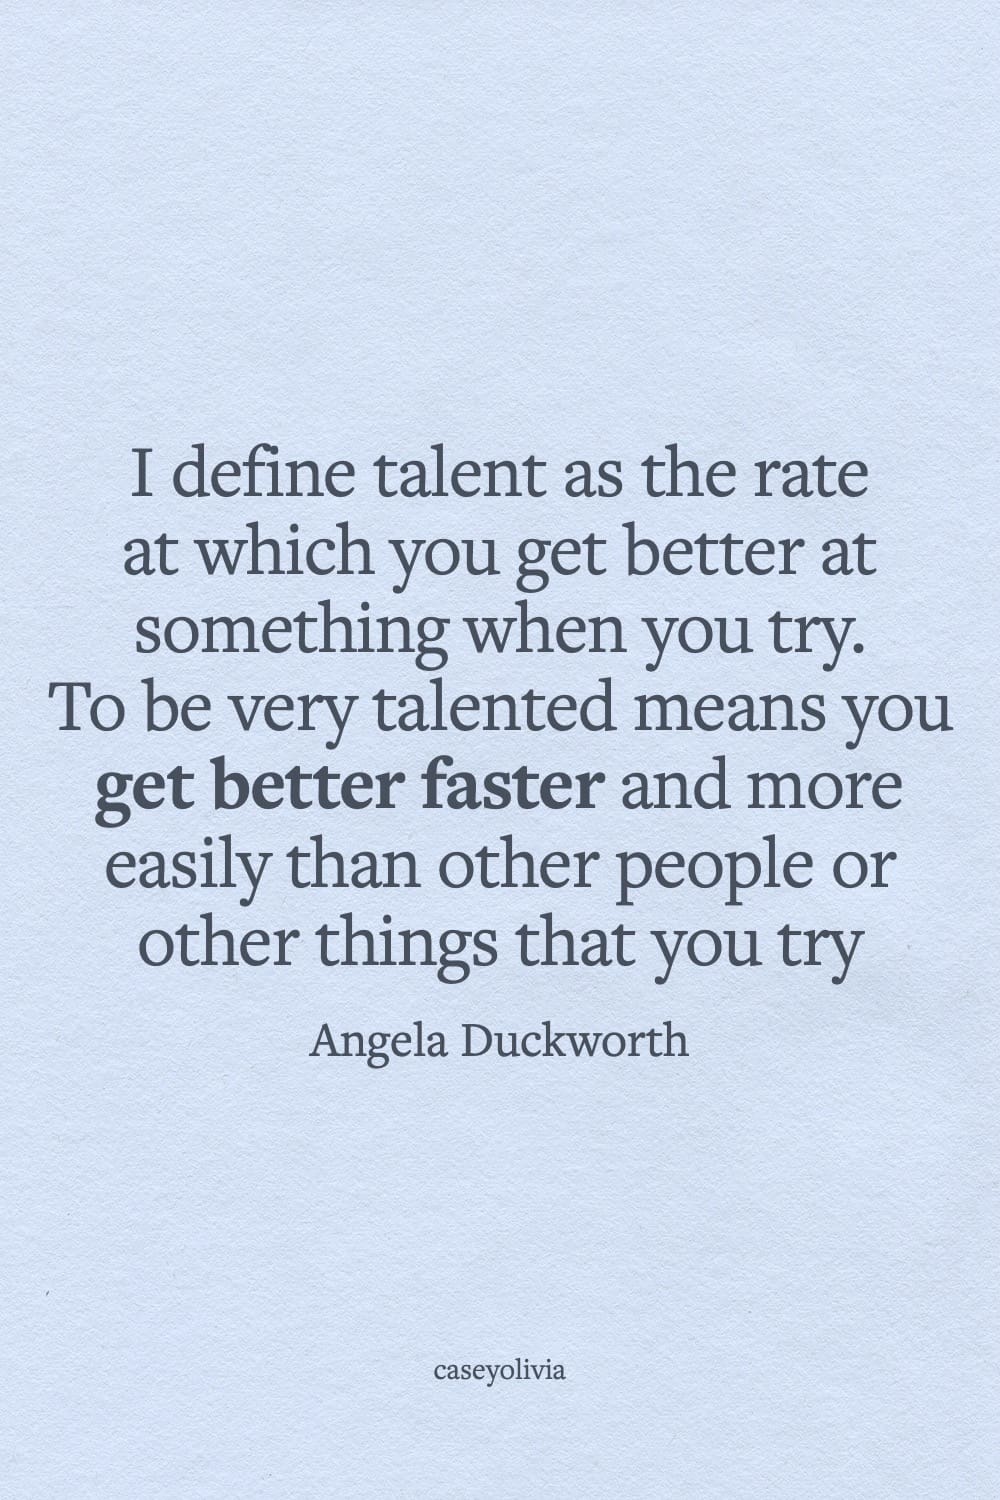 angela duckworth quote image to define the word talent